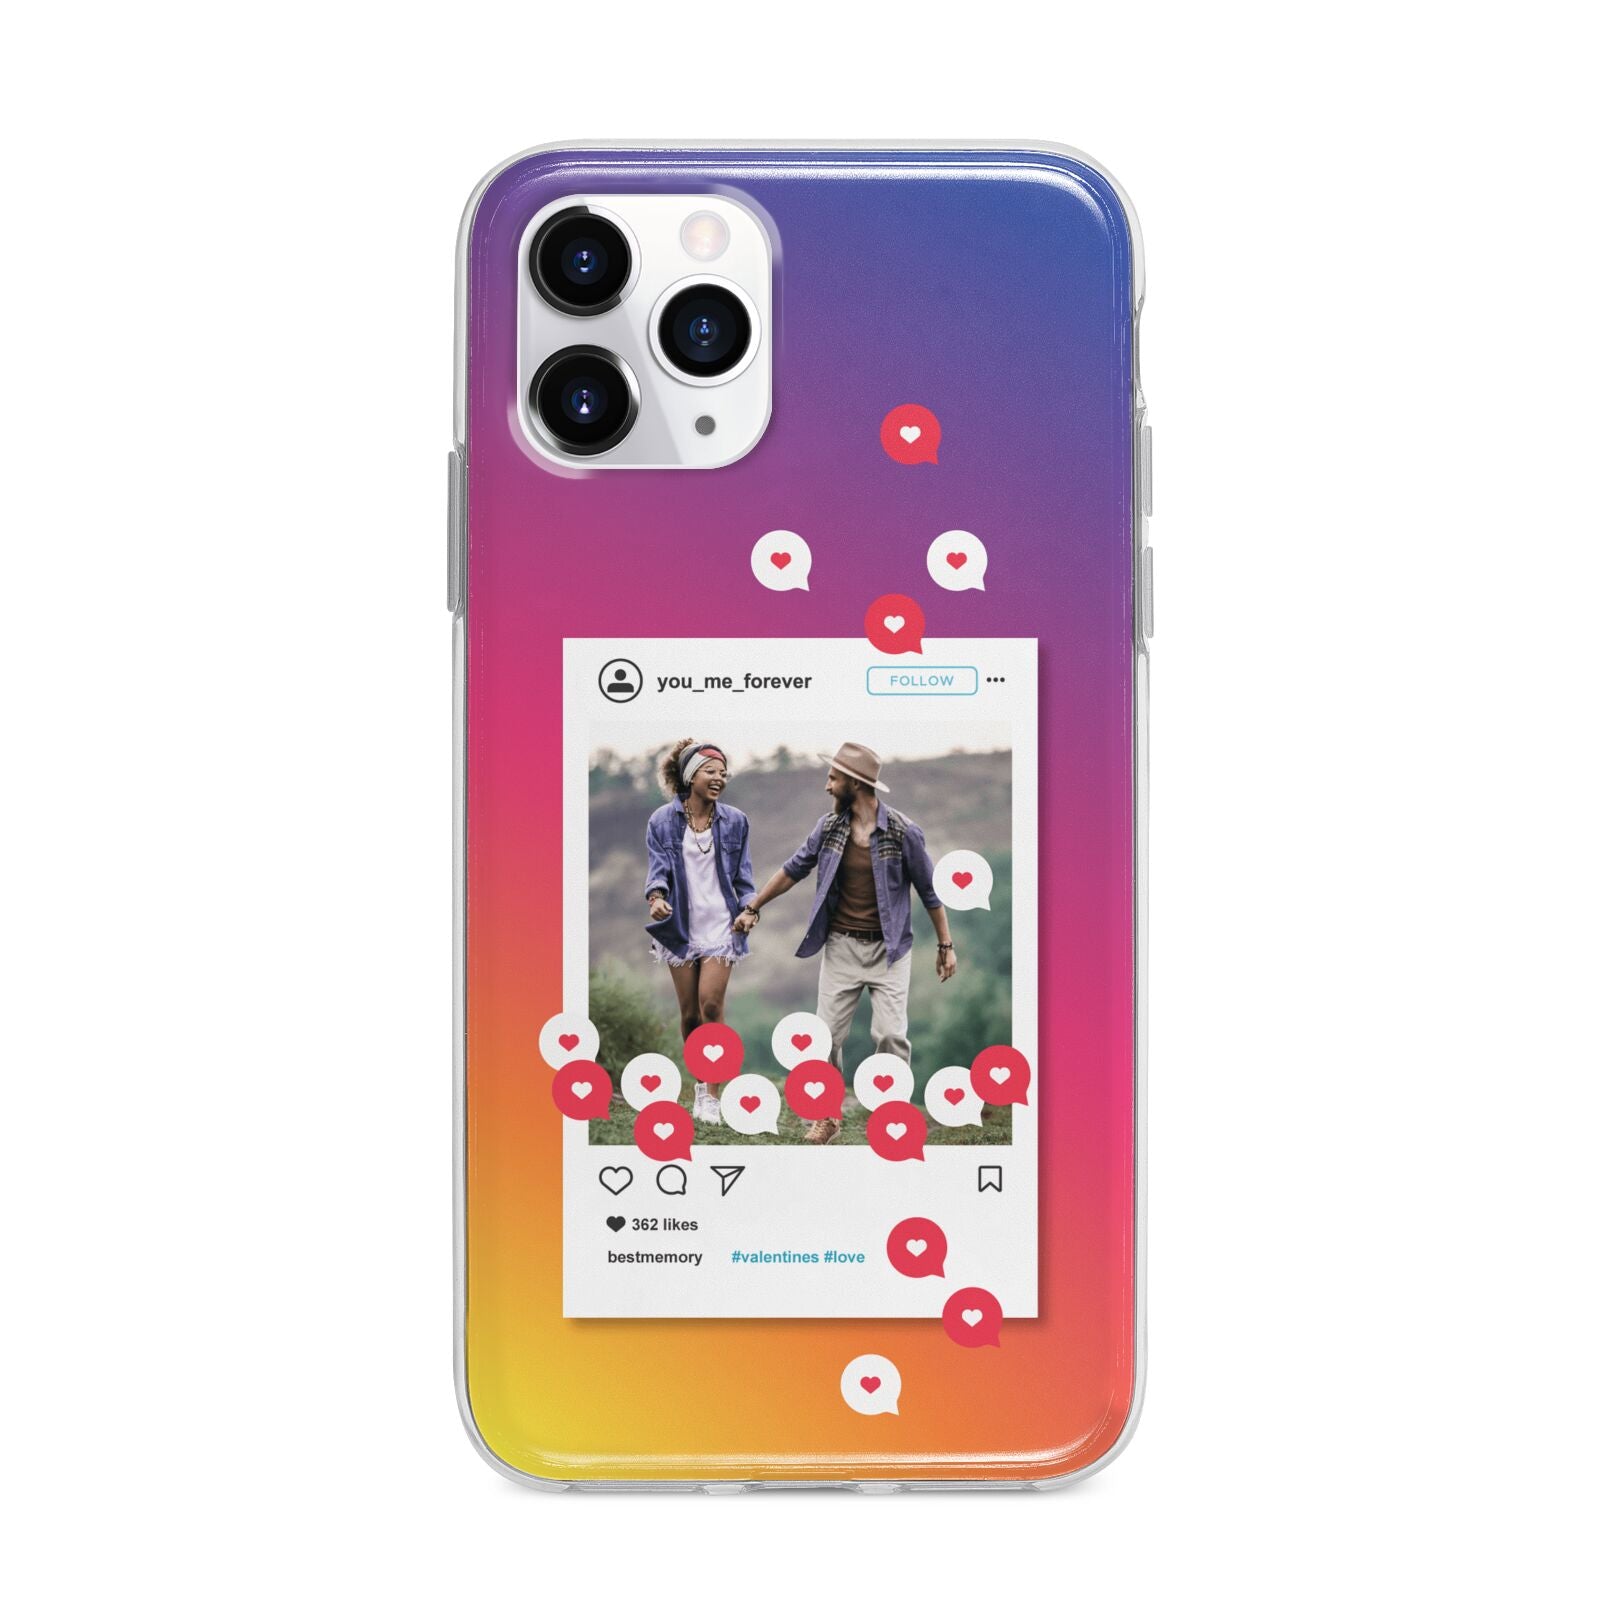 Personalised Social Media Photo Apple iPhone 11 Pro in Silver with Bumper Case